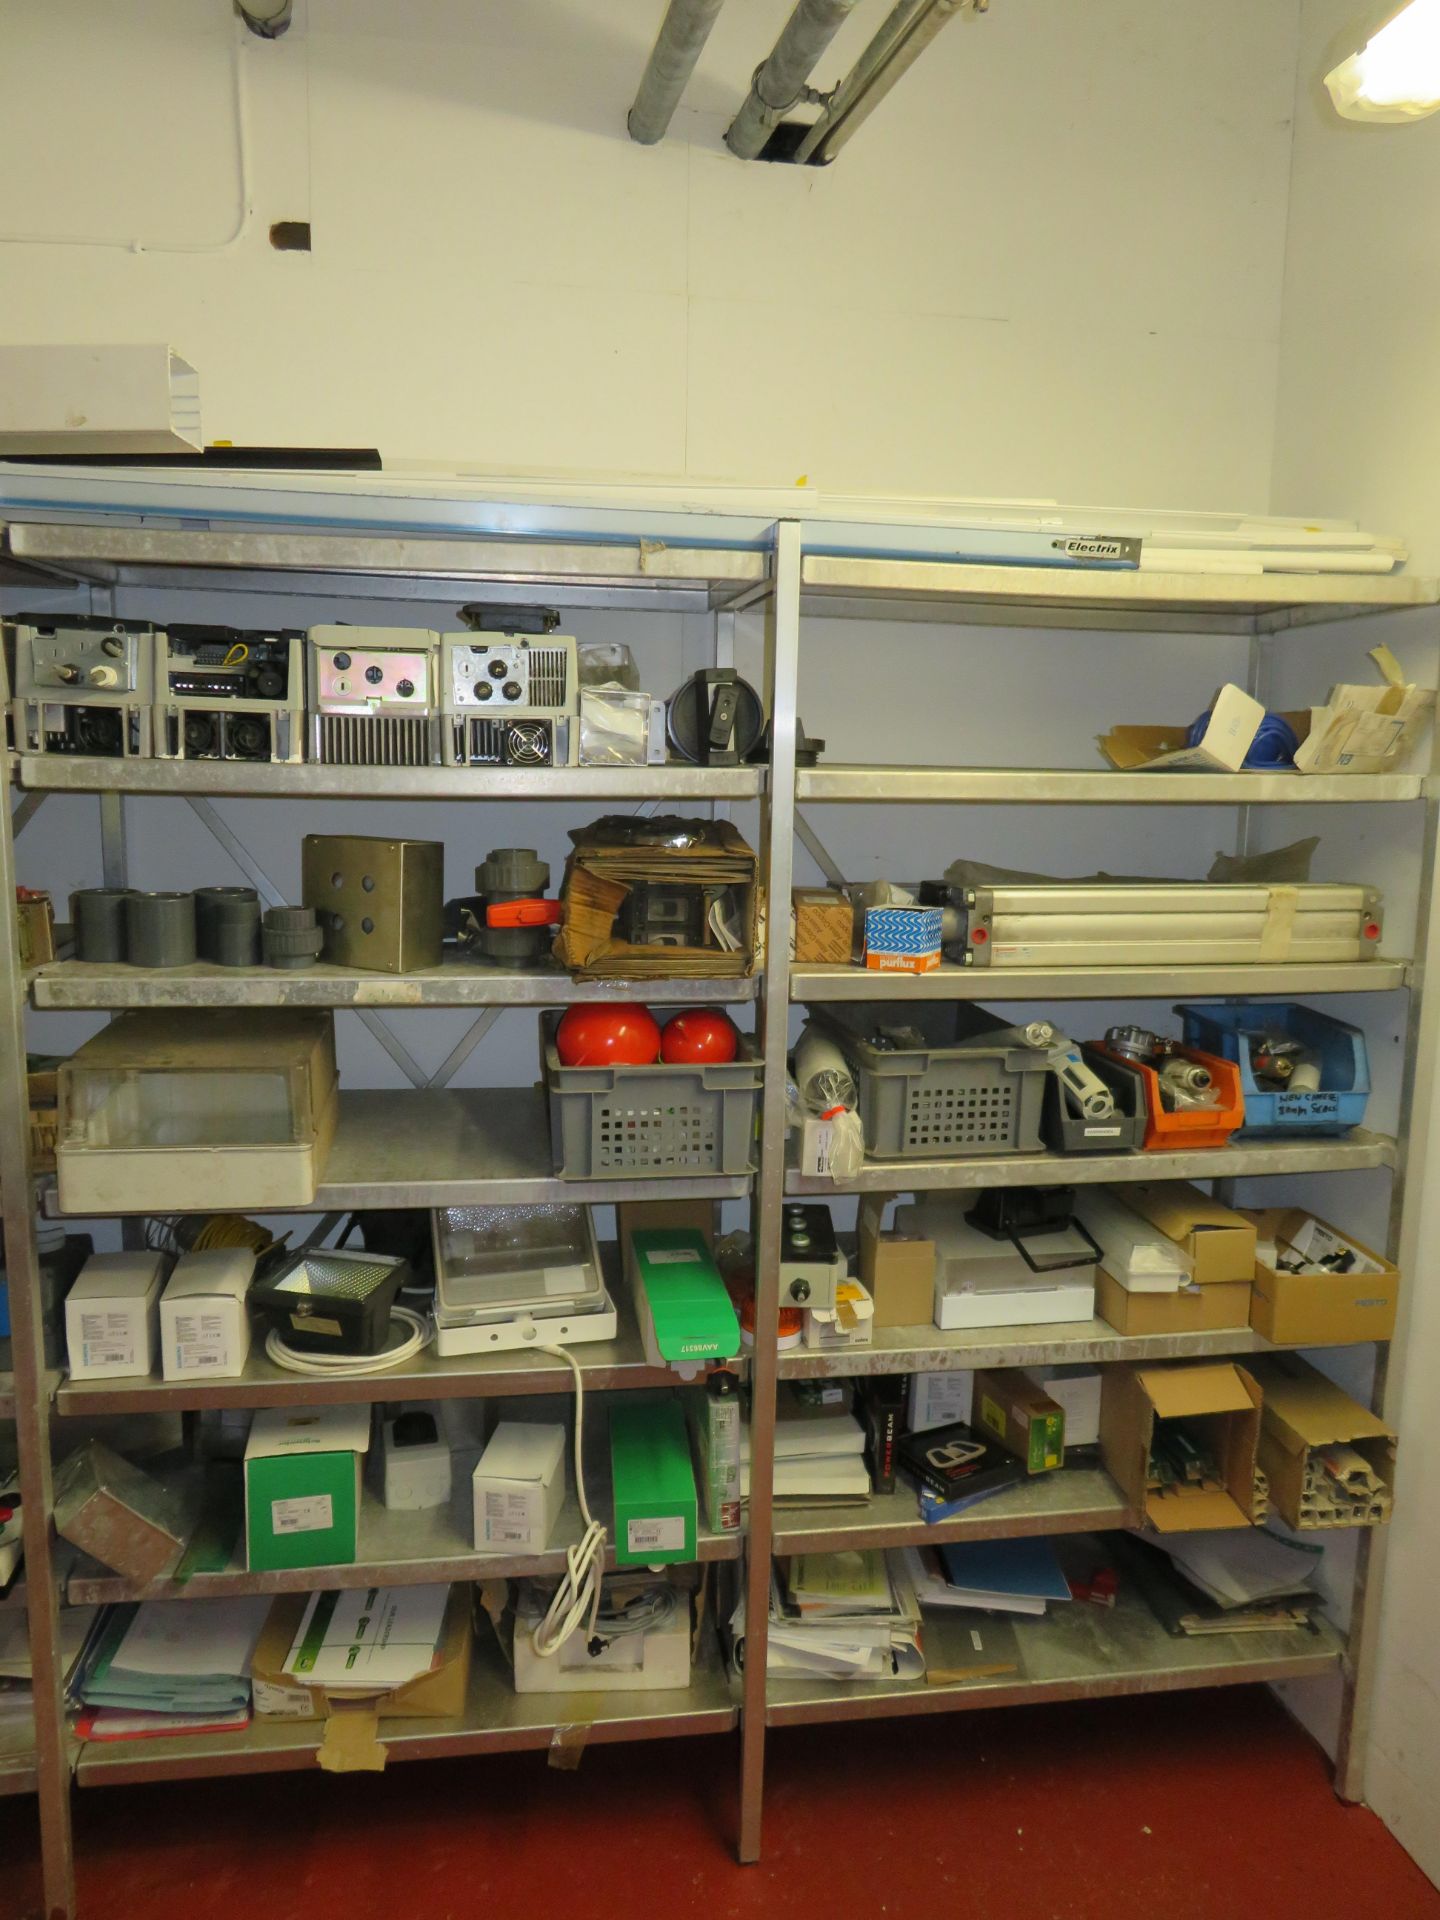 Contents of engineering stores - Image 22 of 22